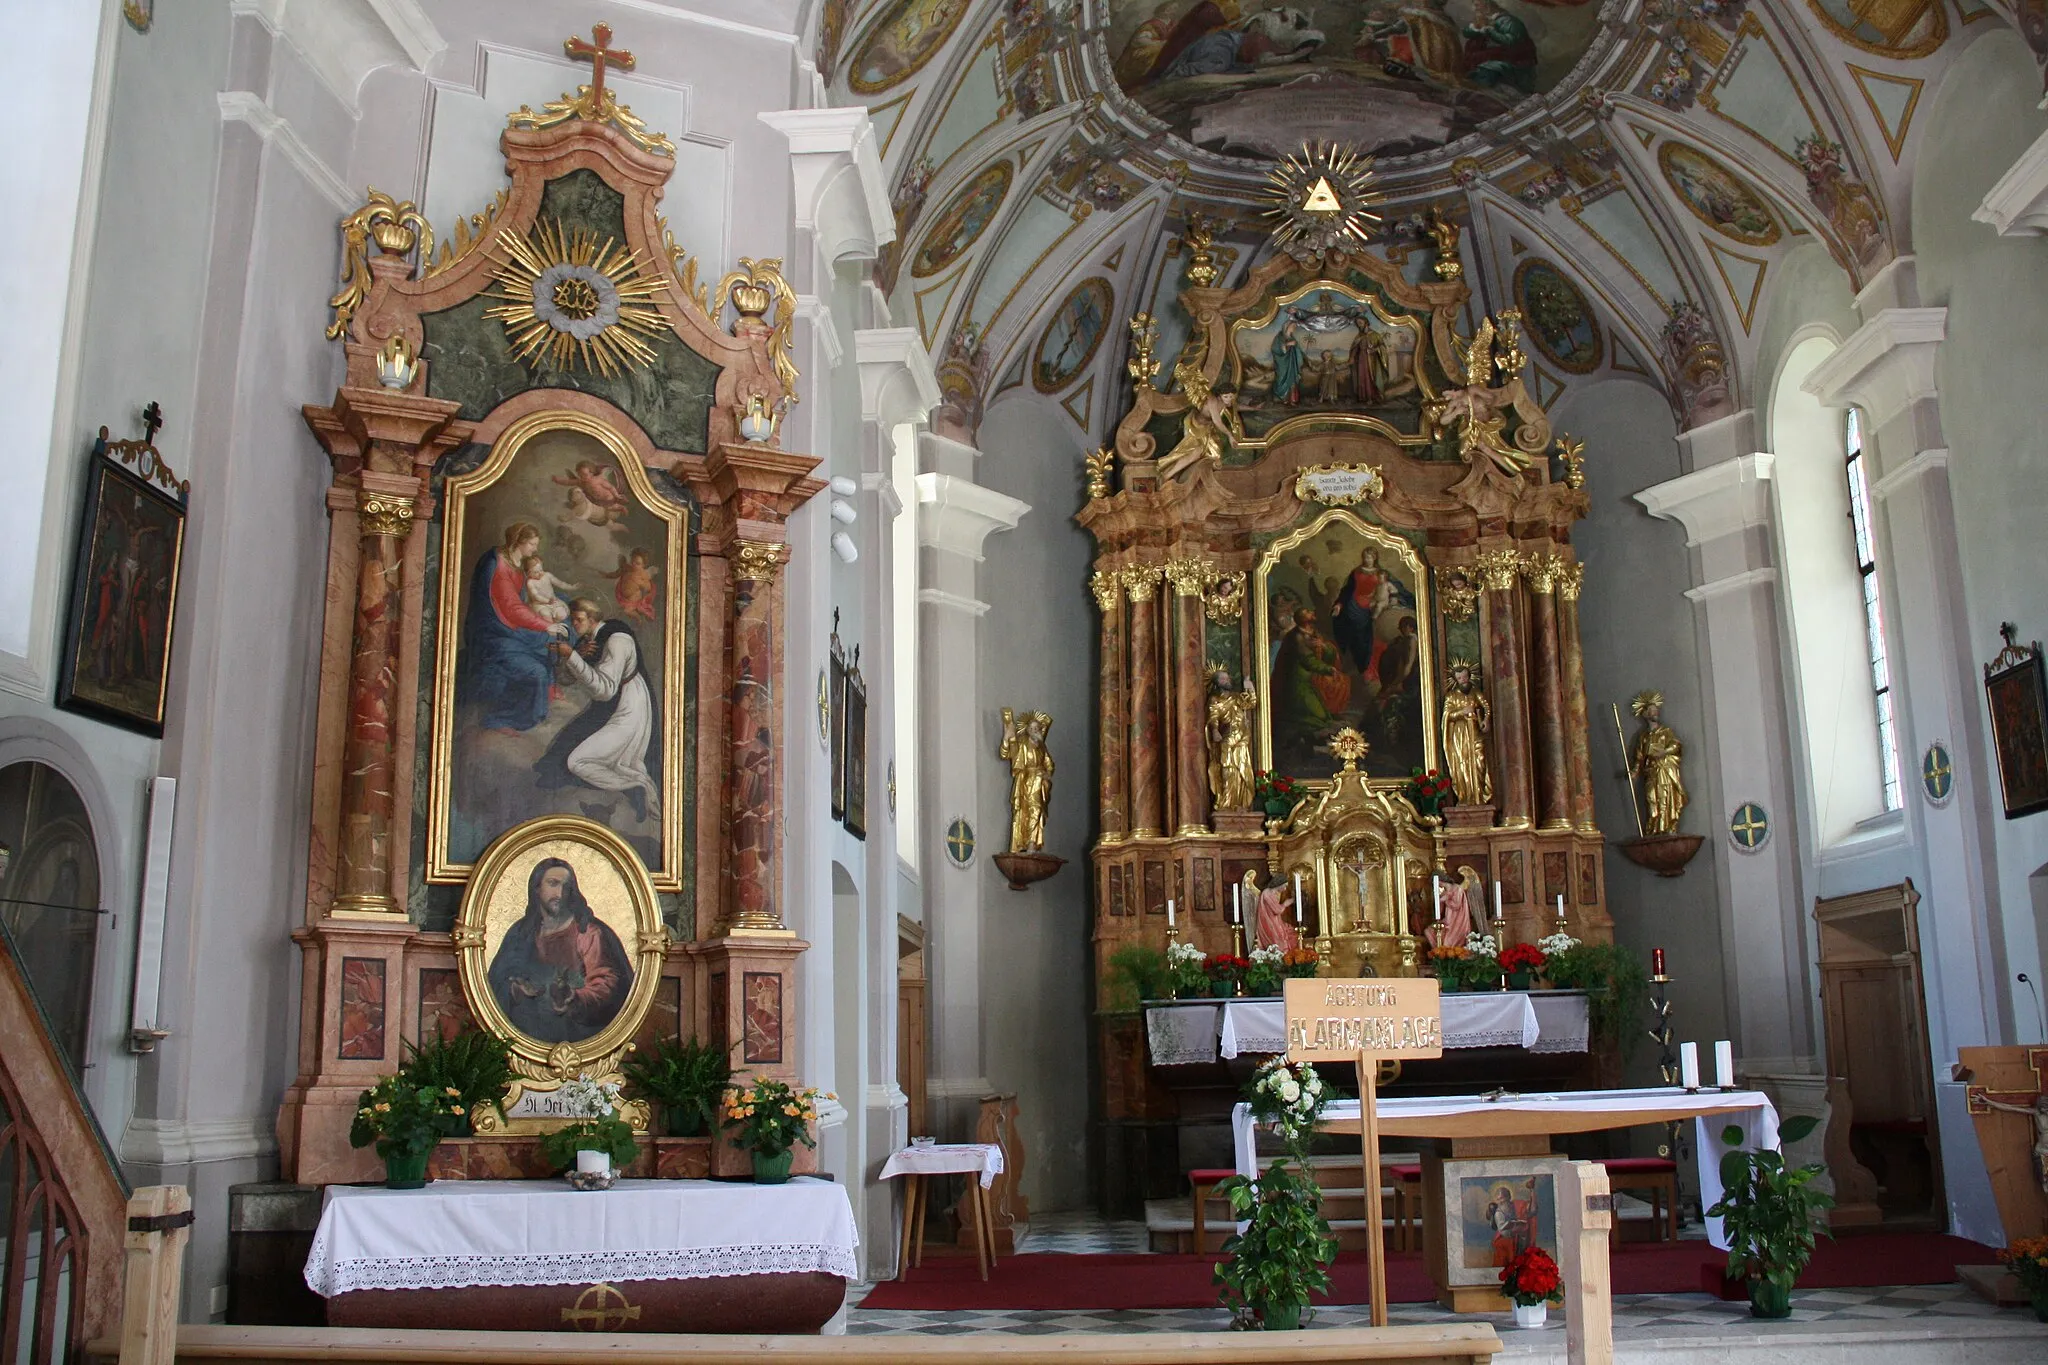 Photo showing: Italy, South Tirol, St. Jakob in Innerpfitsch, Pfarrkirche zum Hl. Jakobus. The church was built between 1821 and 1824 under the direction of the curate Jakob Prantl who built 13 churches throughout Tyrol. The ceiling frescoes depict the Most Holy Sacrament and the decapitation of St. James are by Josef Renzler dating from 1823. The three altarpieces represent St. James, the baptism of Jesus and Our Lady Queen of the Holy Rosary are by Leopold Puellacher between 1824 and 1825.